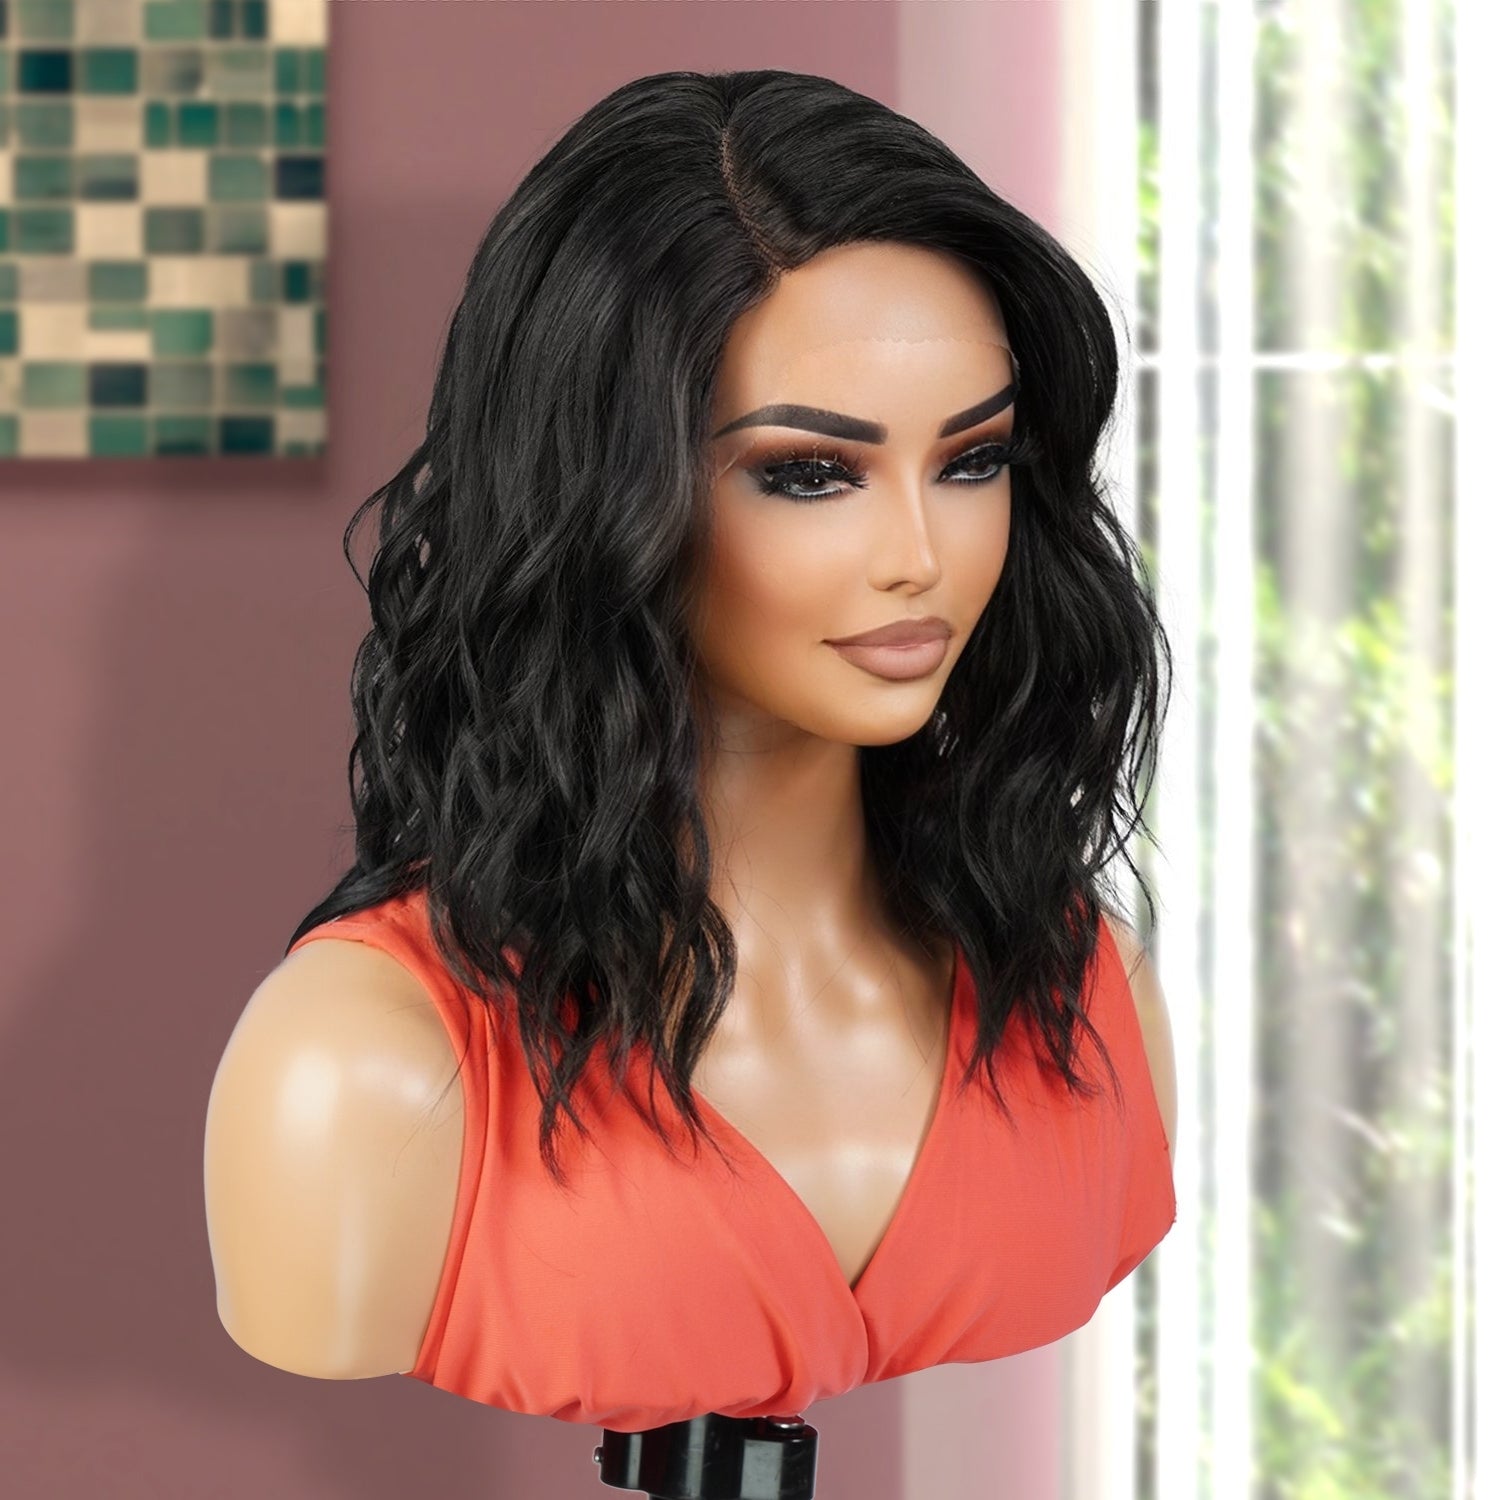 Elevate your look with our stunning loose wave bob wig! Made with high-quality heat-resistant fibers, it features a side deep part lace front design for a natural-looking hairline. The curly wavy style adds volume, while the 14-inch length and bob cut offer a trendy touch. Perfect for black women, this versatile wig is a must-have. Shop now for ultimate style and versatility!